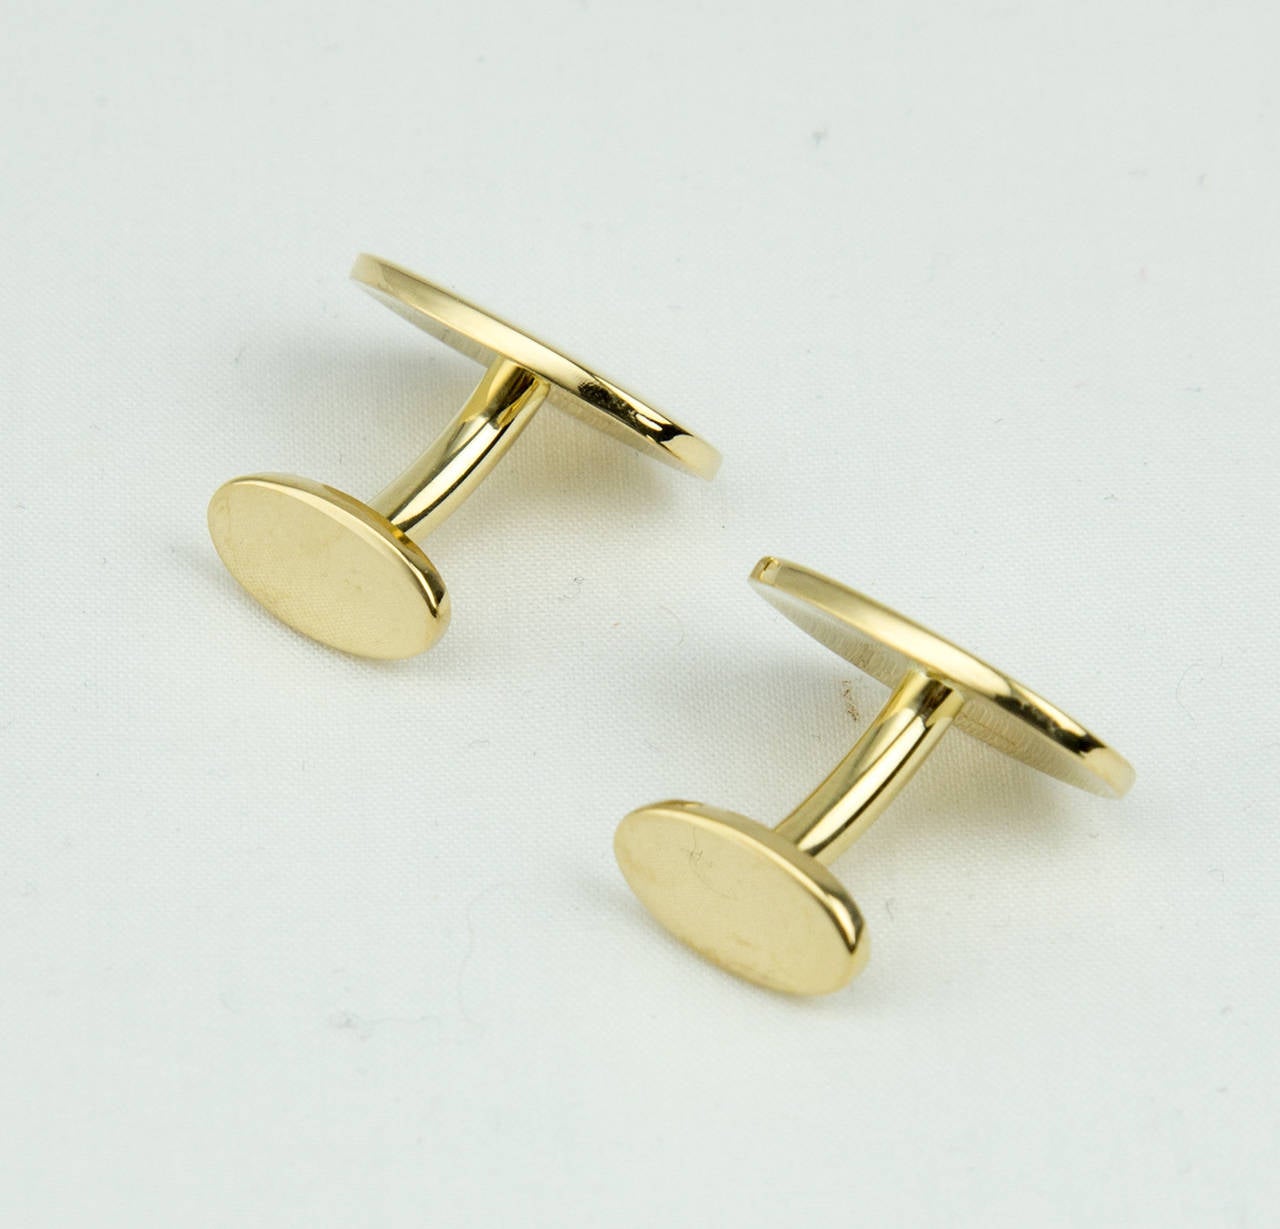 Classic Tiffany & Co. Cufflinks; polished oval shapes with push-through ovals; crafted in 18K yellow gold; marked: TIFFANY & CO. 750. approx. dimensions: 19.5mm x 13.5mm; approx. total weight: 14.4gm. C1960s Sophisticated & Stylish!